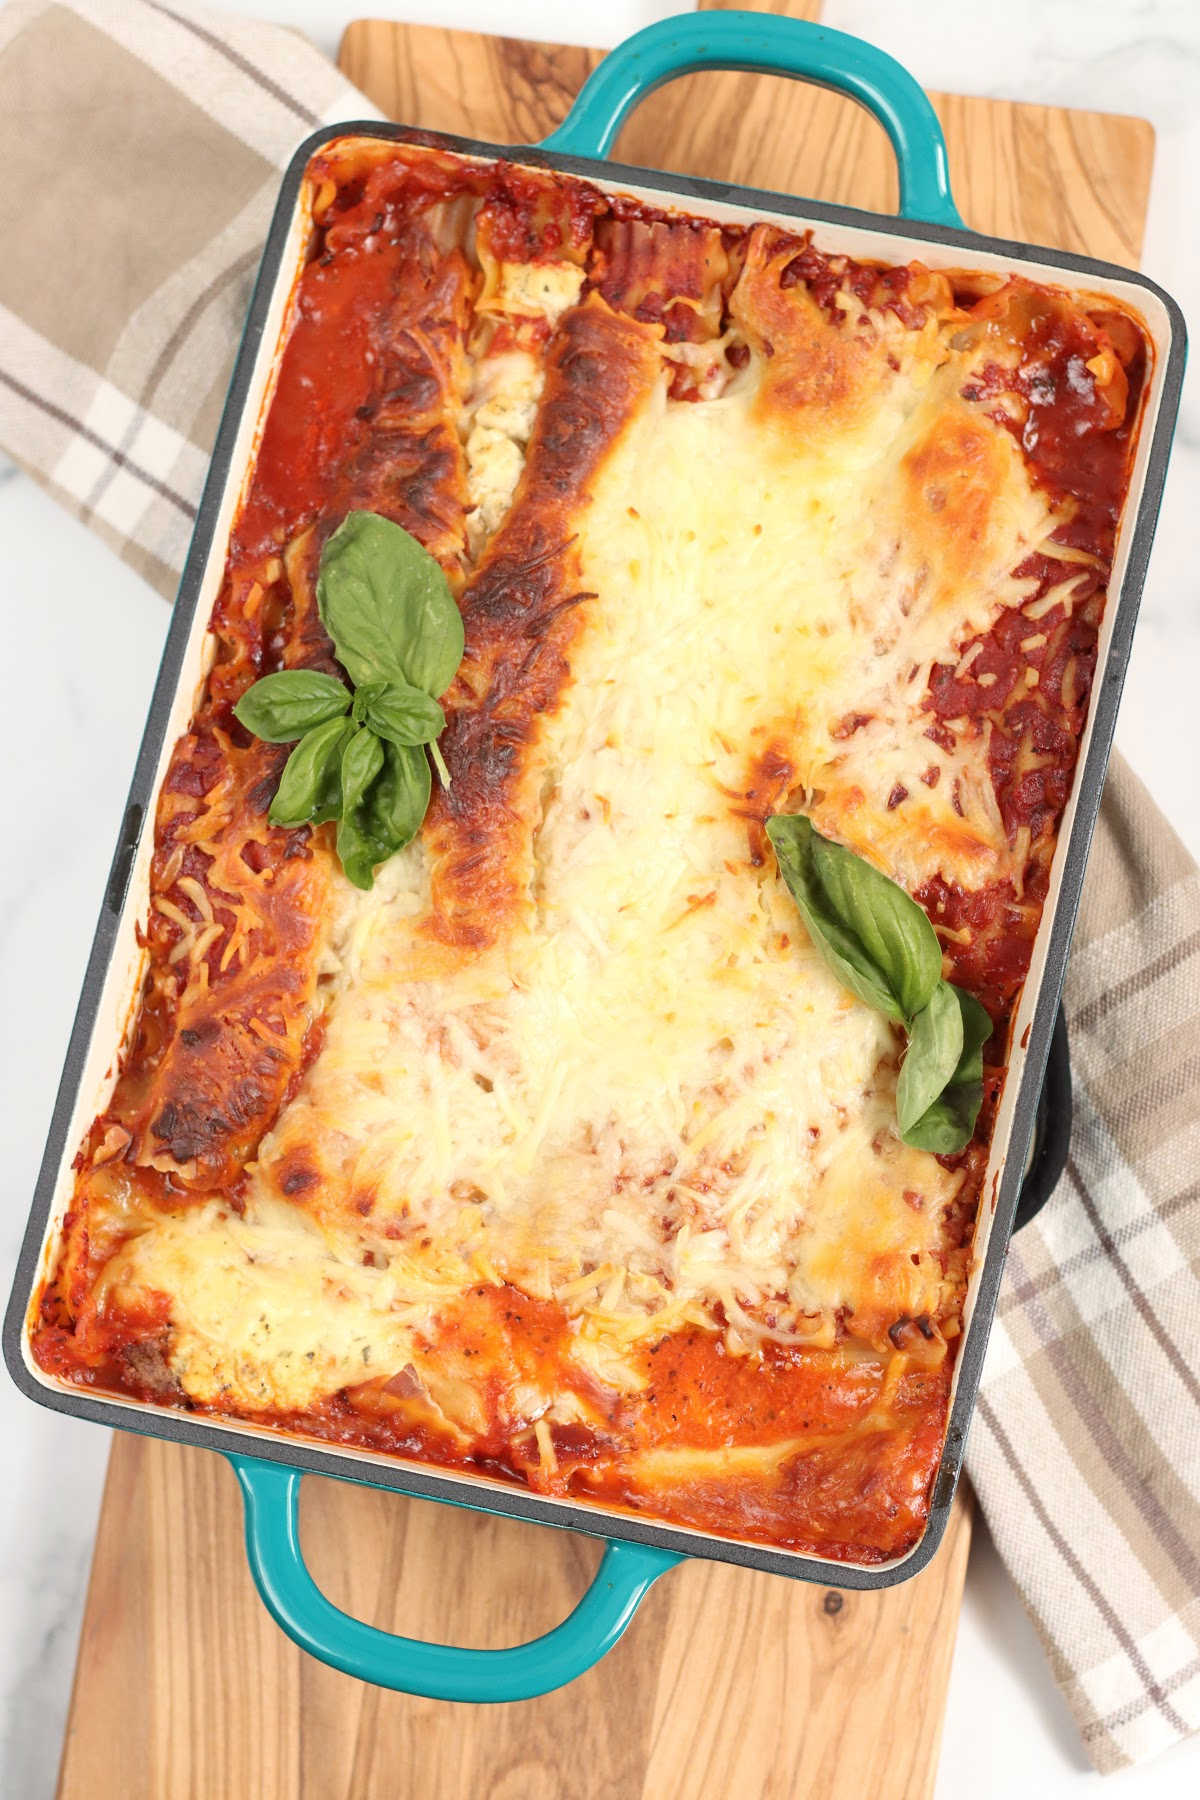 Teal green baking pan with lasagna and golden browned cheese.